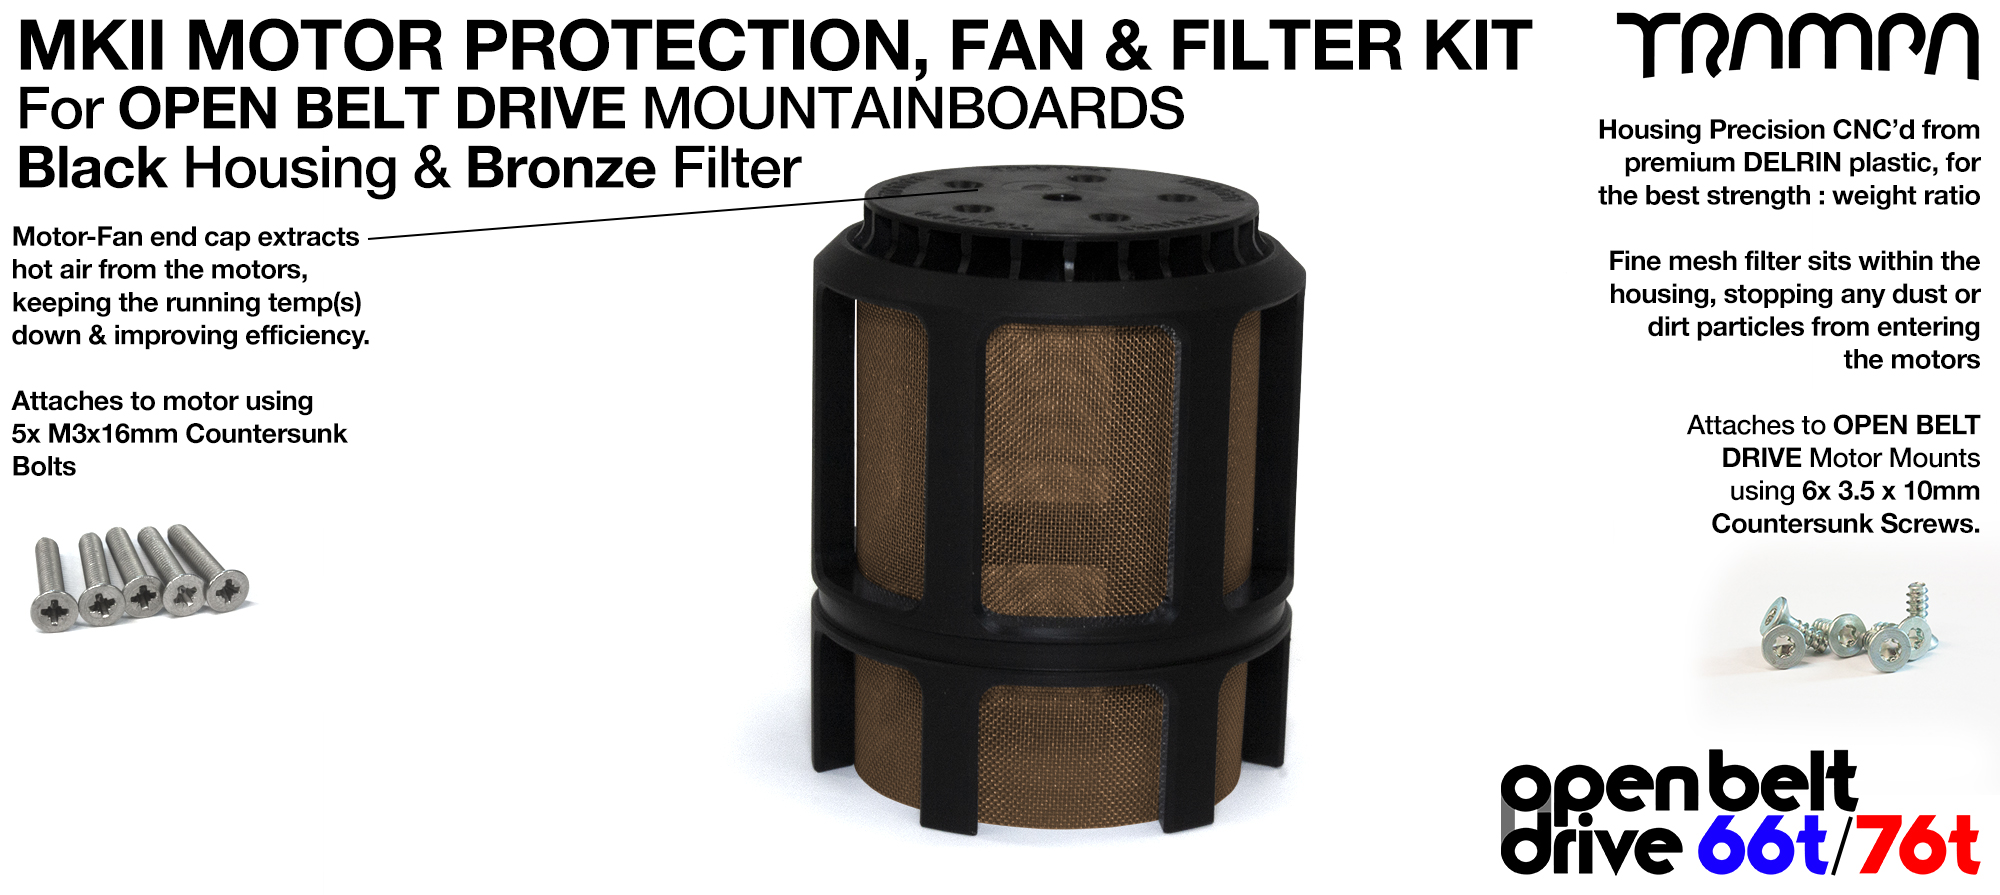 FULL CAGE Motor protection SUPER STRONG DELRIN Plastic includes Fan & BRONZE Filter - SINGLE